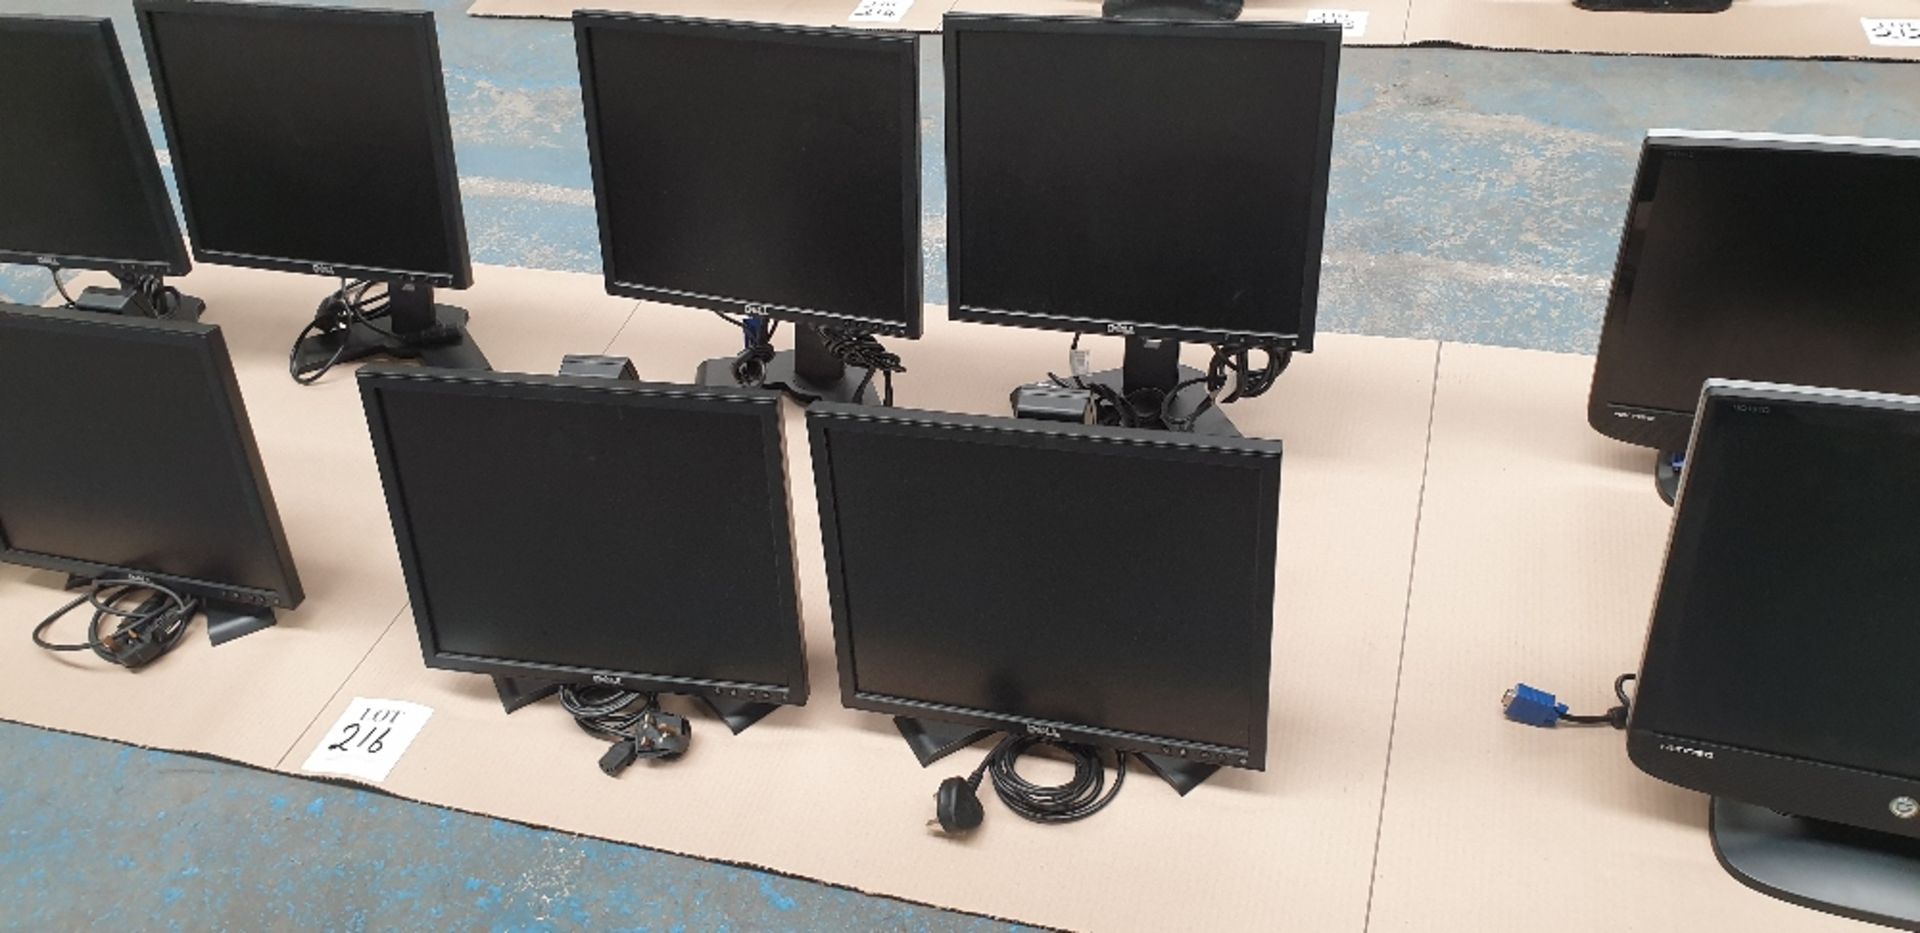 4 - Dell 19" monitors with serial port and 4 - USBs on rise and fall stands